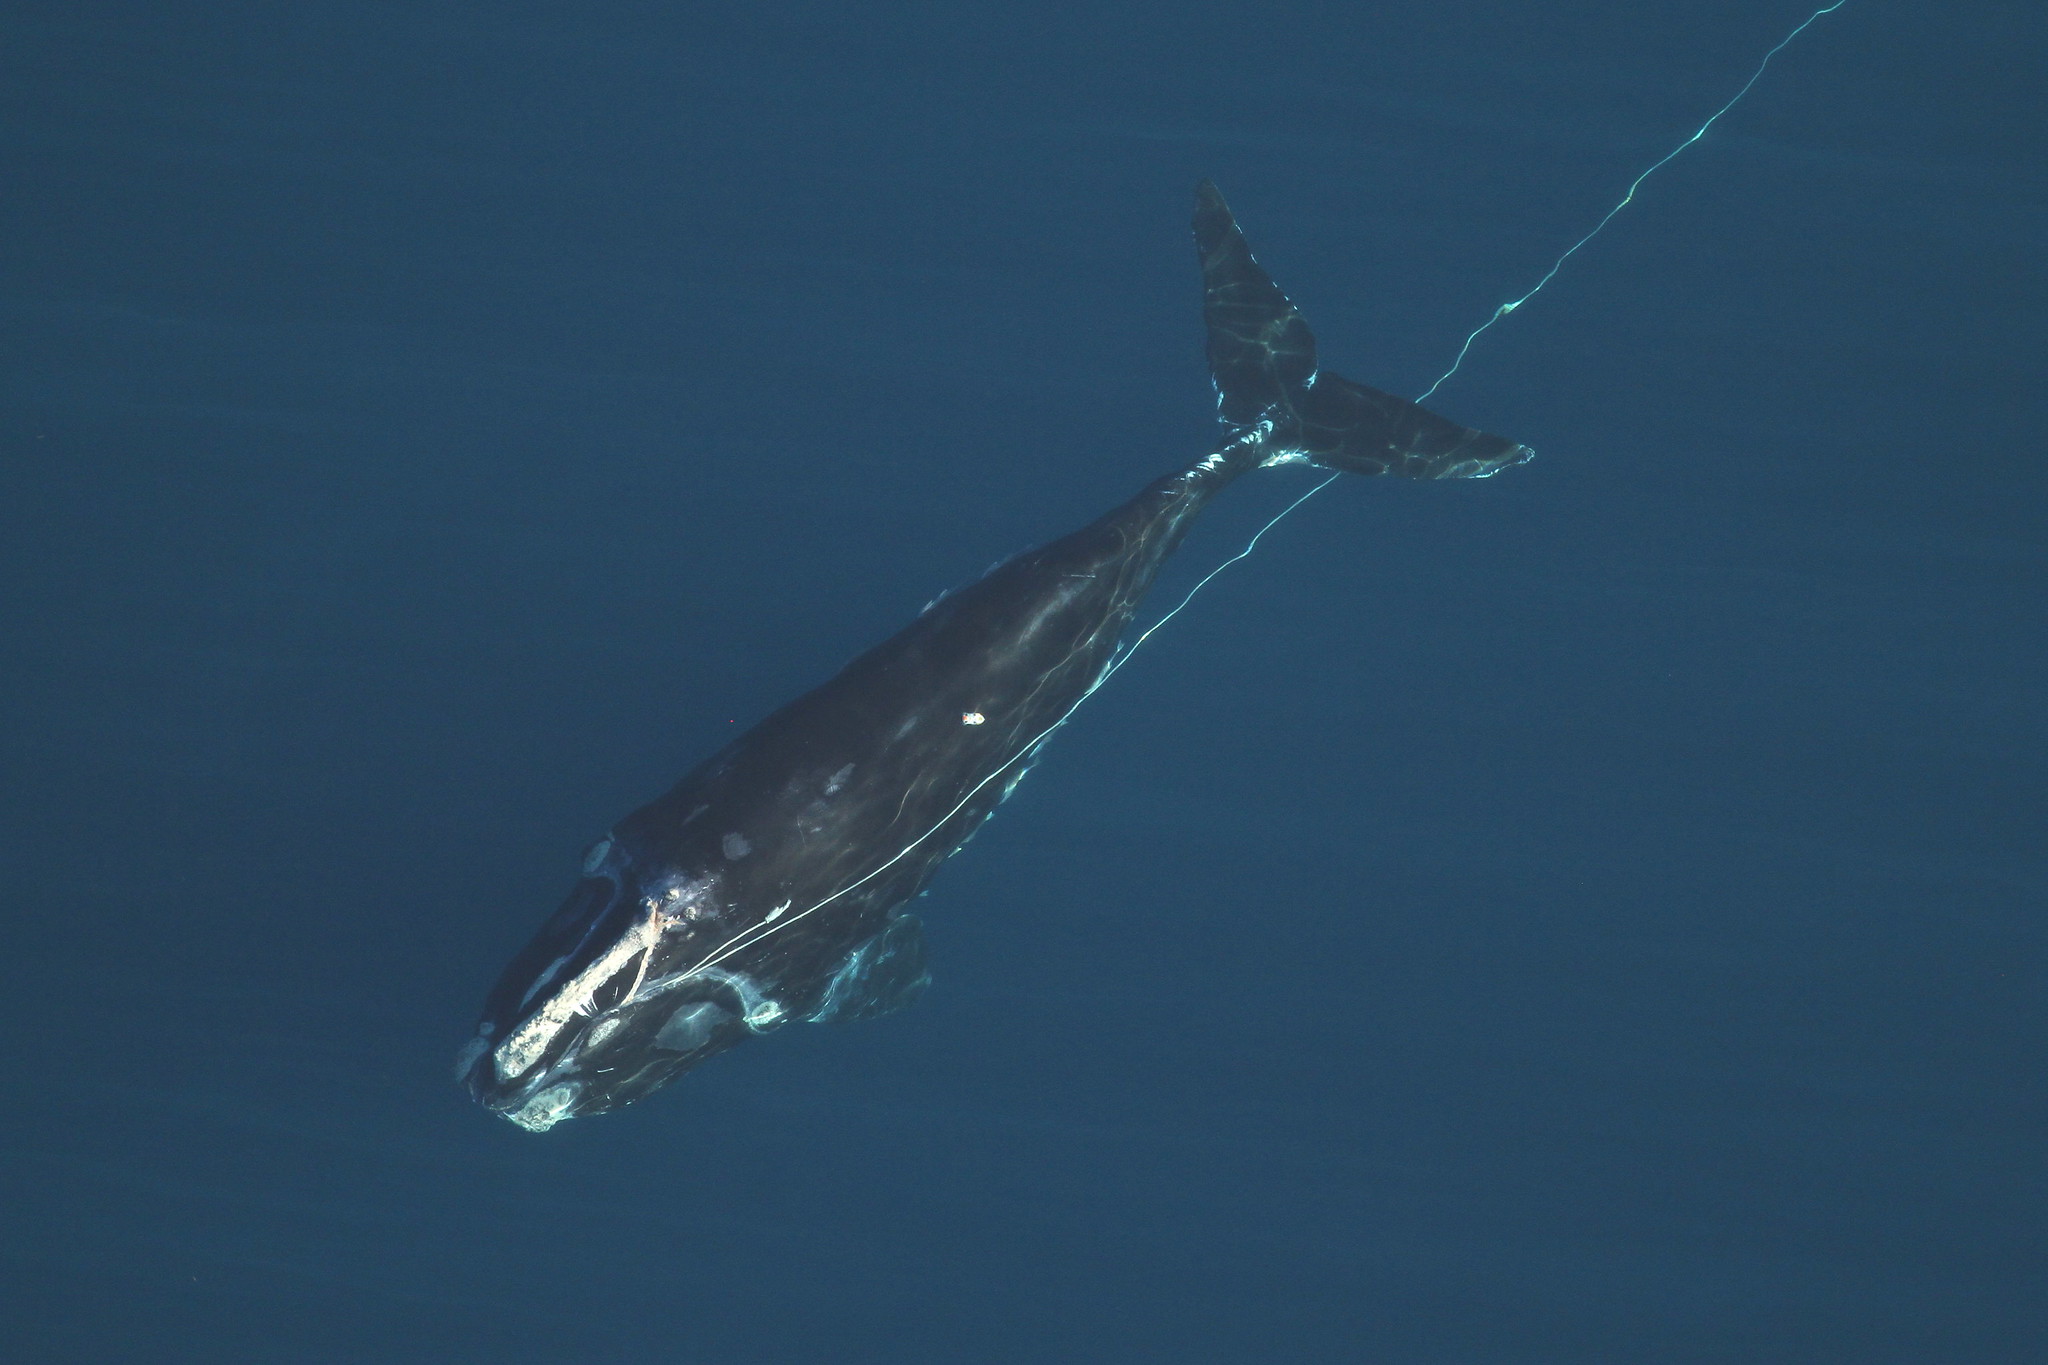 <p>A right whale entangled in heavy fishing rope off the coast of Florida in the United States. Getting tangled like this can injure or even kill whales and other marine mammals. (Image: <a href="https://www.flickr.com/photos/myfwc/12683617055/in/gallery-144603962@N07-72157716644590747/">Florida Fish and Wildlife Conservation Commission</a>, taken under NOAA research permit / <a href="https://www.flickr.com/people/myfwc/">Flickr</a>, <a href="https://creativecommons.org/licenses/by-nc-nd/2.0/">CC BY NC ND</a>)</p>